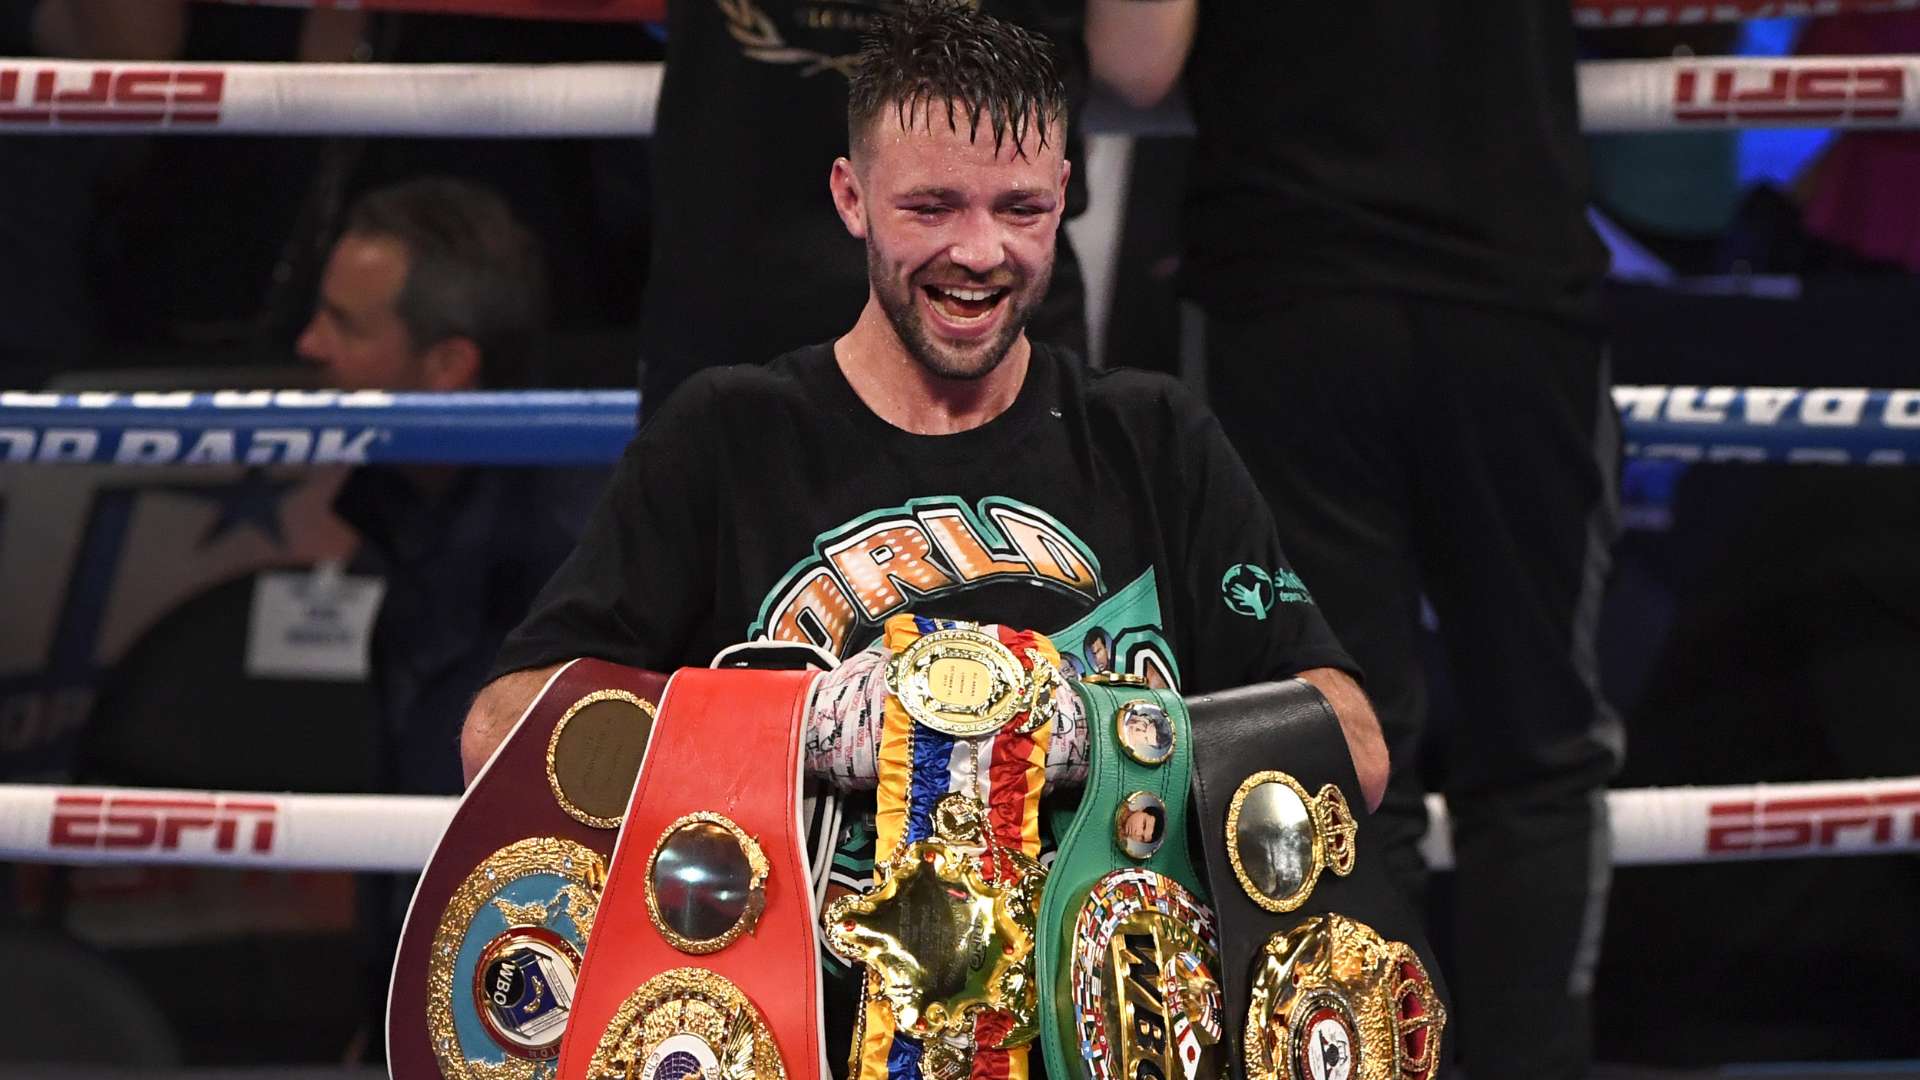 Josh Taylor with his title belts